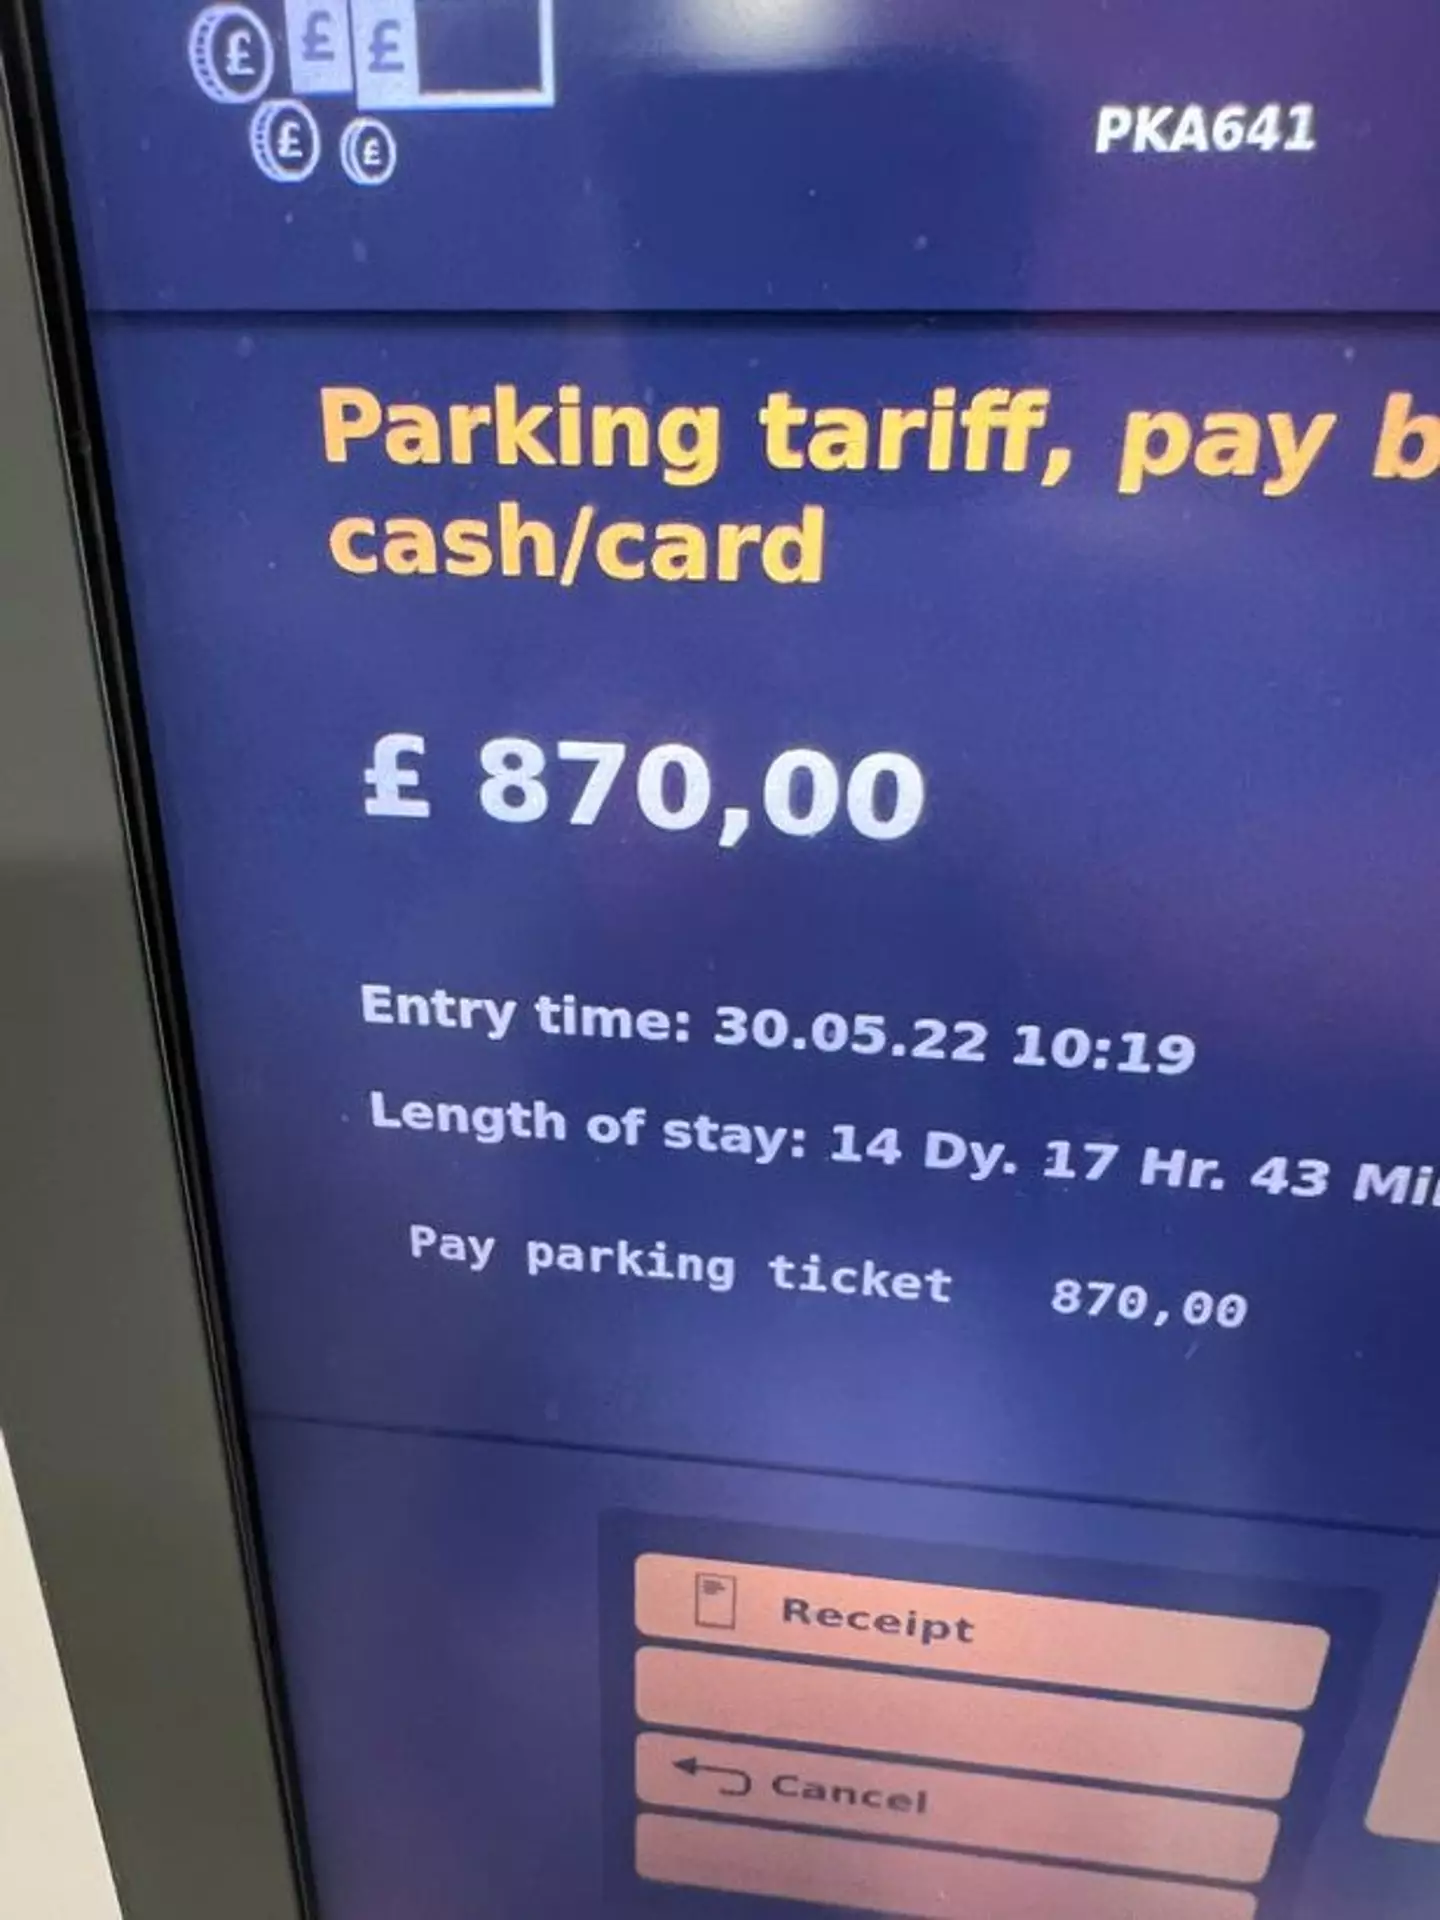 A man was charged hundreds of pounds for using the wrong airport car park.